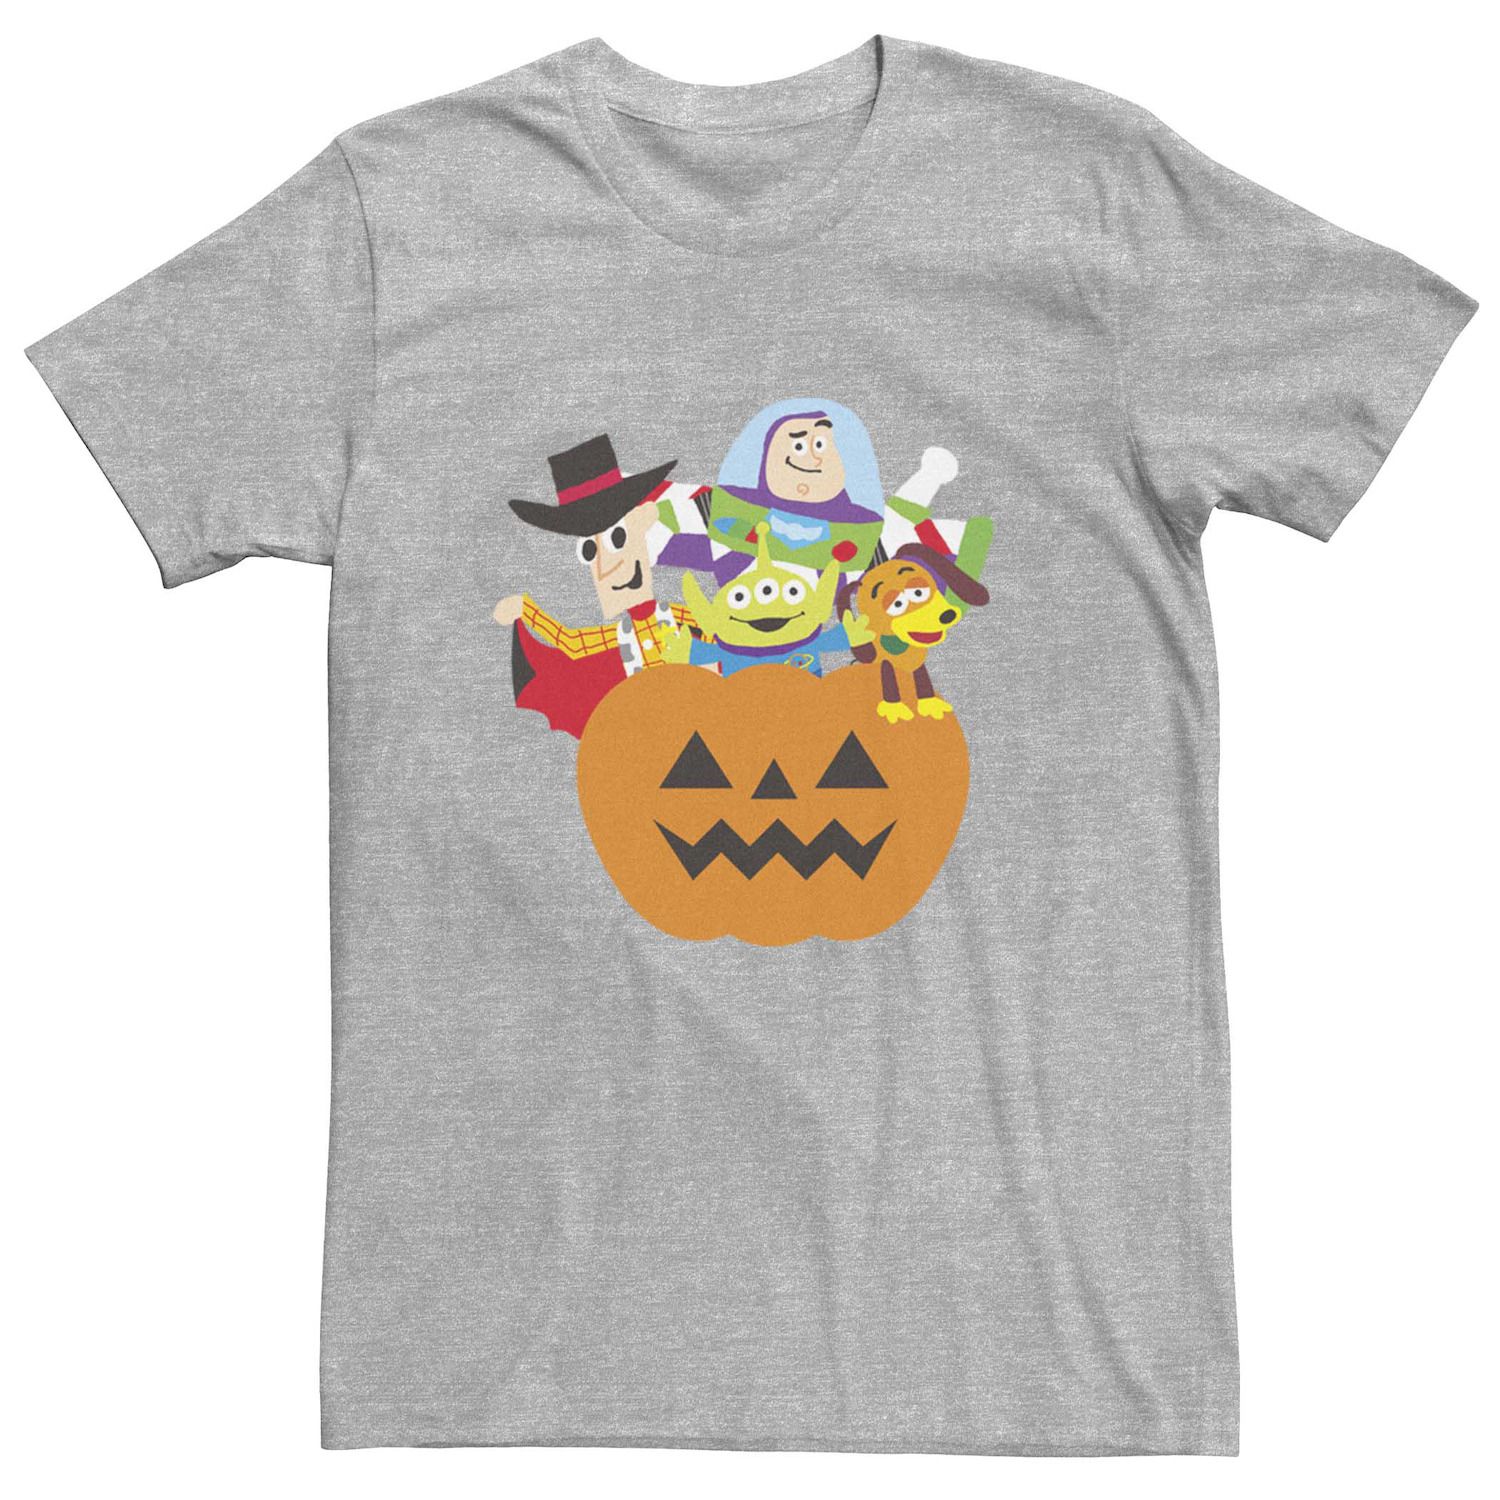 Image for Licensed Character Men's Disney/Pixar Toy Story Animated Character Tee at Kohl's.